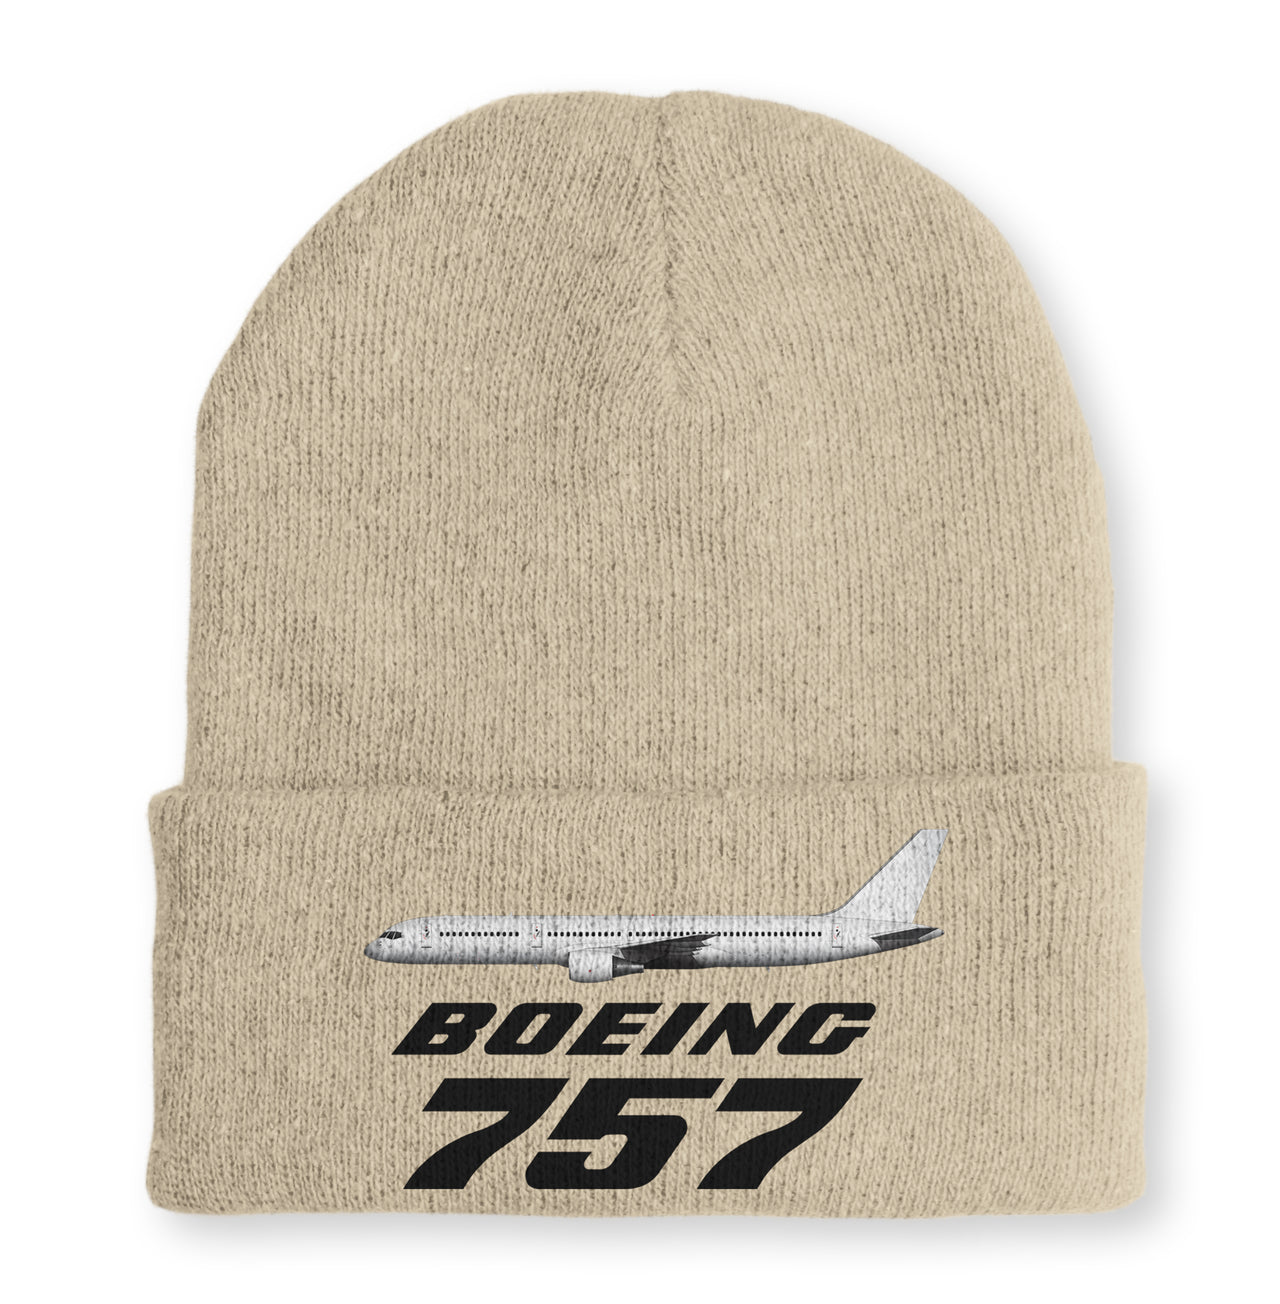 The Boeing 757 Embroidered Beanies